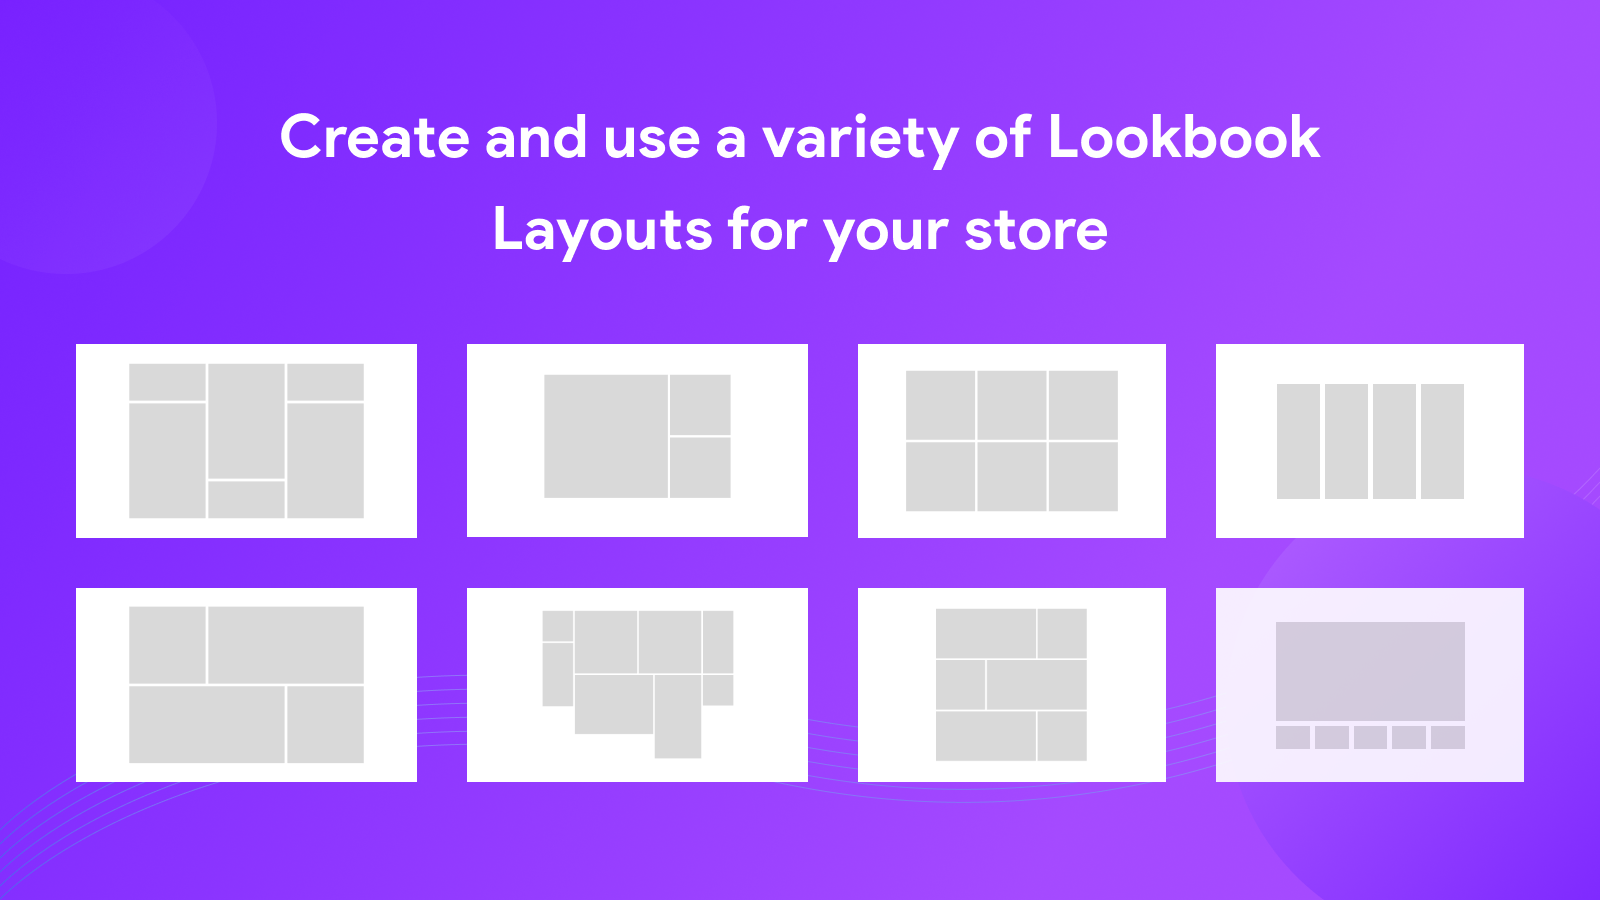 Create and use a variety of Lookbook Layouts for your store